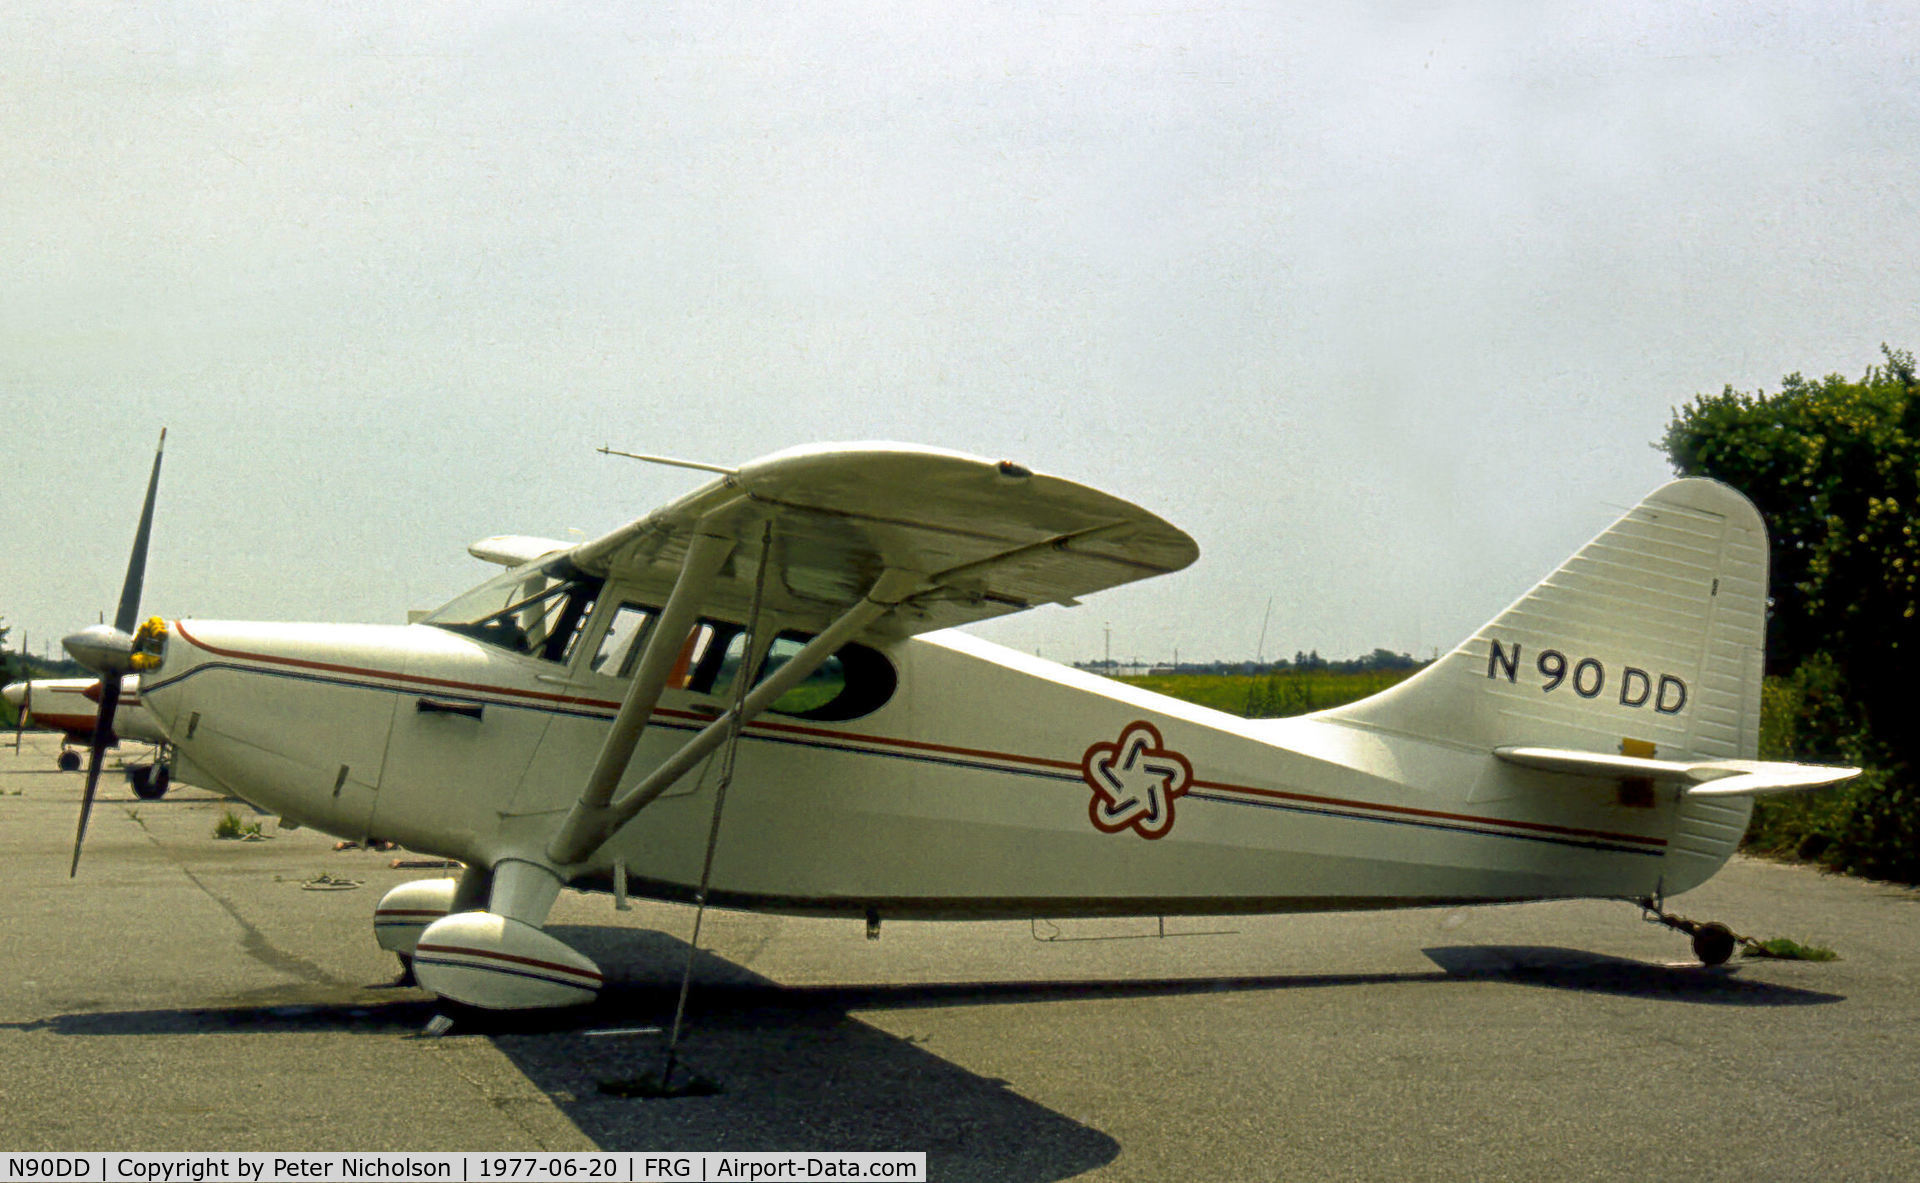 N90DD, Stinson 108-3 Voyager C/N 1084718, Stinson 108 in US Bi-Centennial markings as seen at Republic Airport on Long Island in he Summer of 1977.